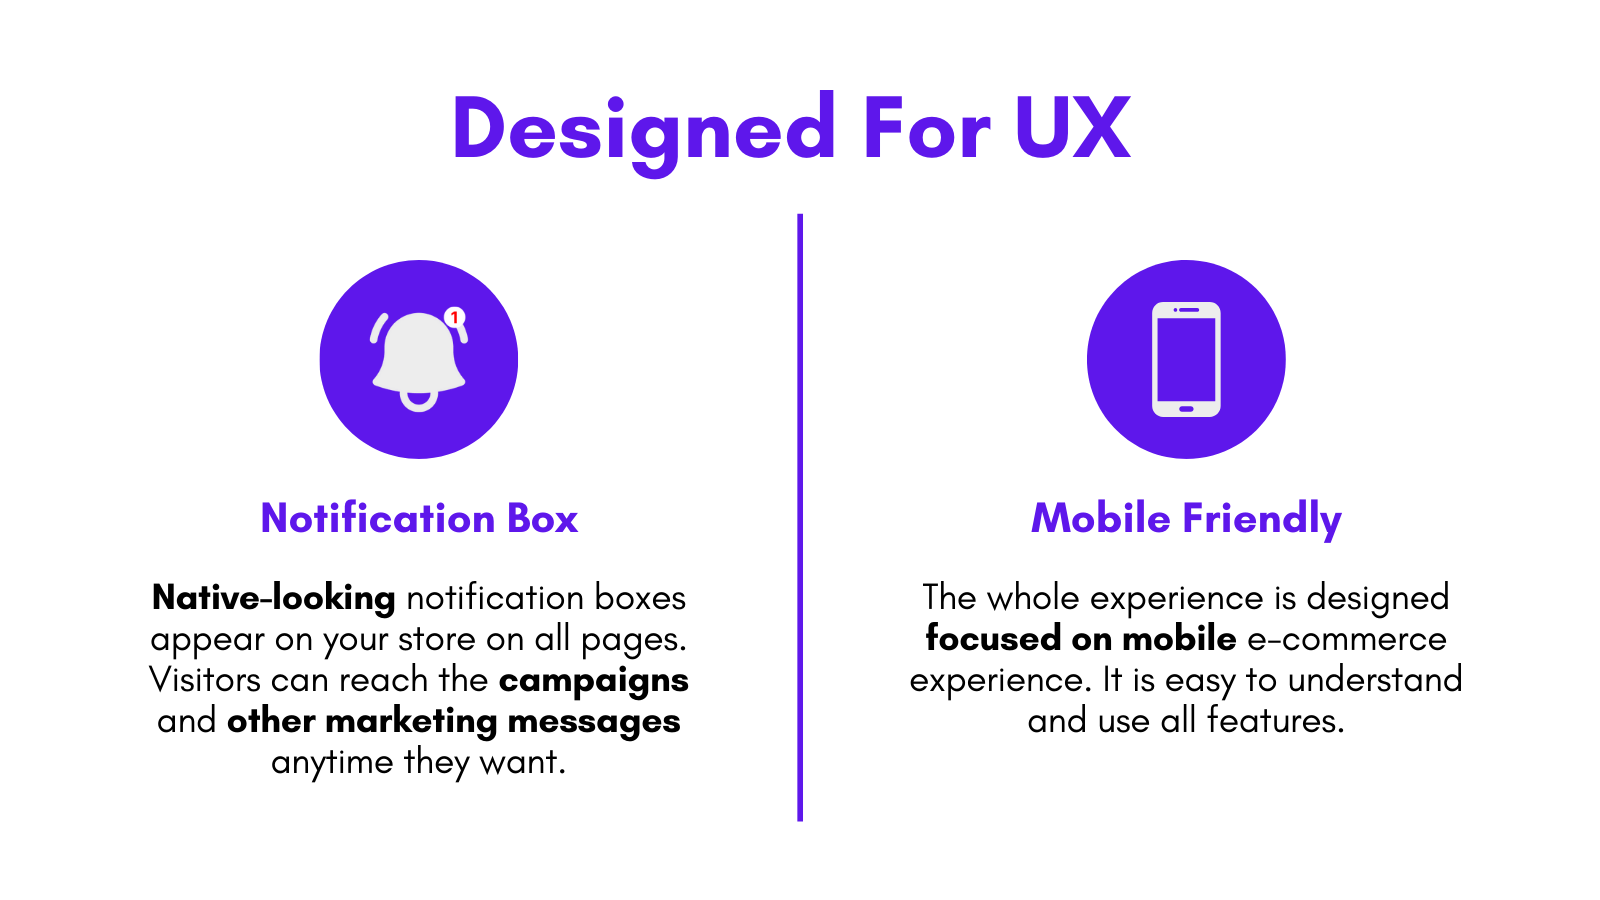 UX Friendly Time-Limited Discount Codes to Create Urgency